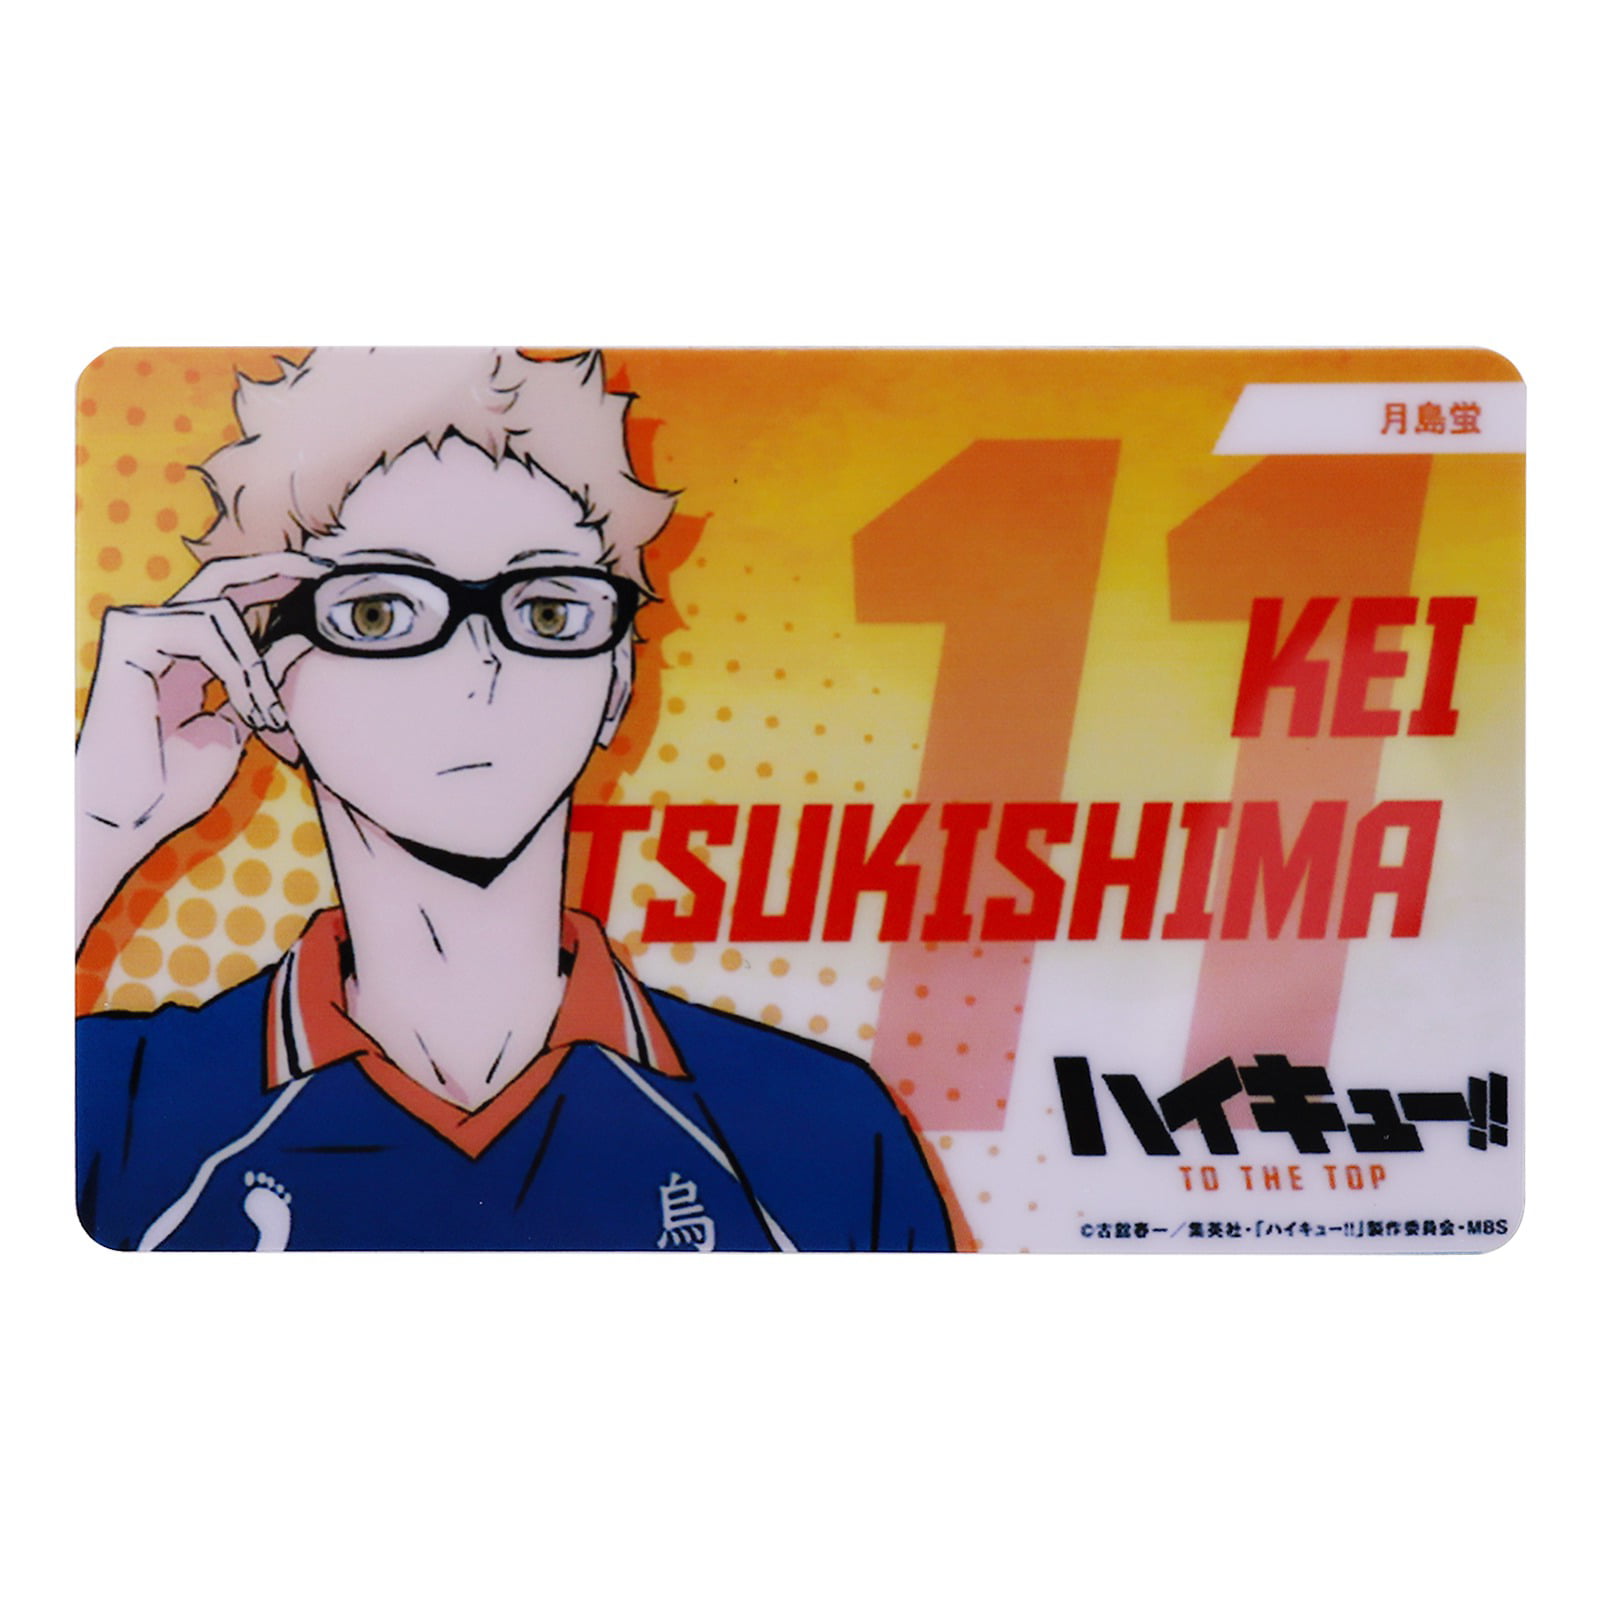 cyan oak haikyuu stickers anime figure print waterproof card stickers suitable for bus card id card hot gift for anime fans walmart com